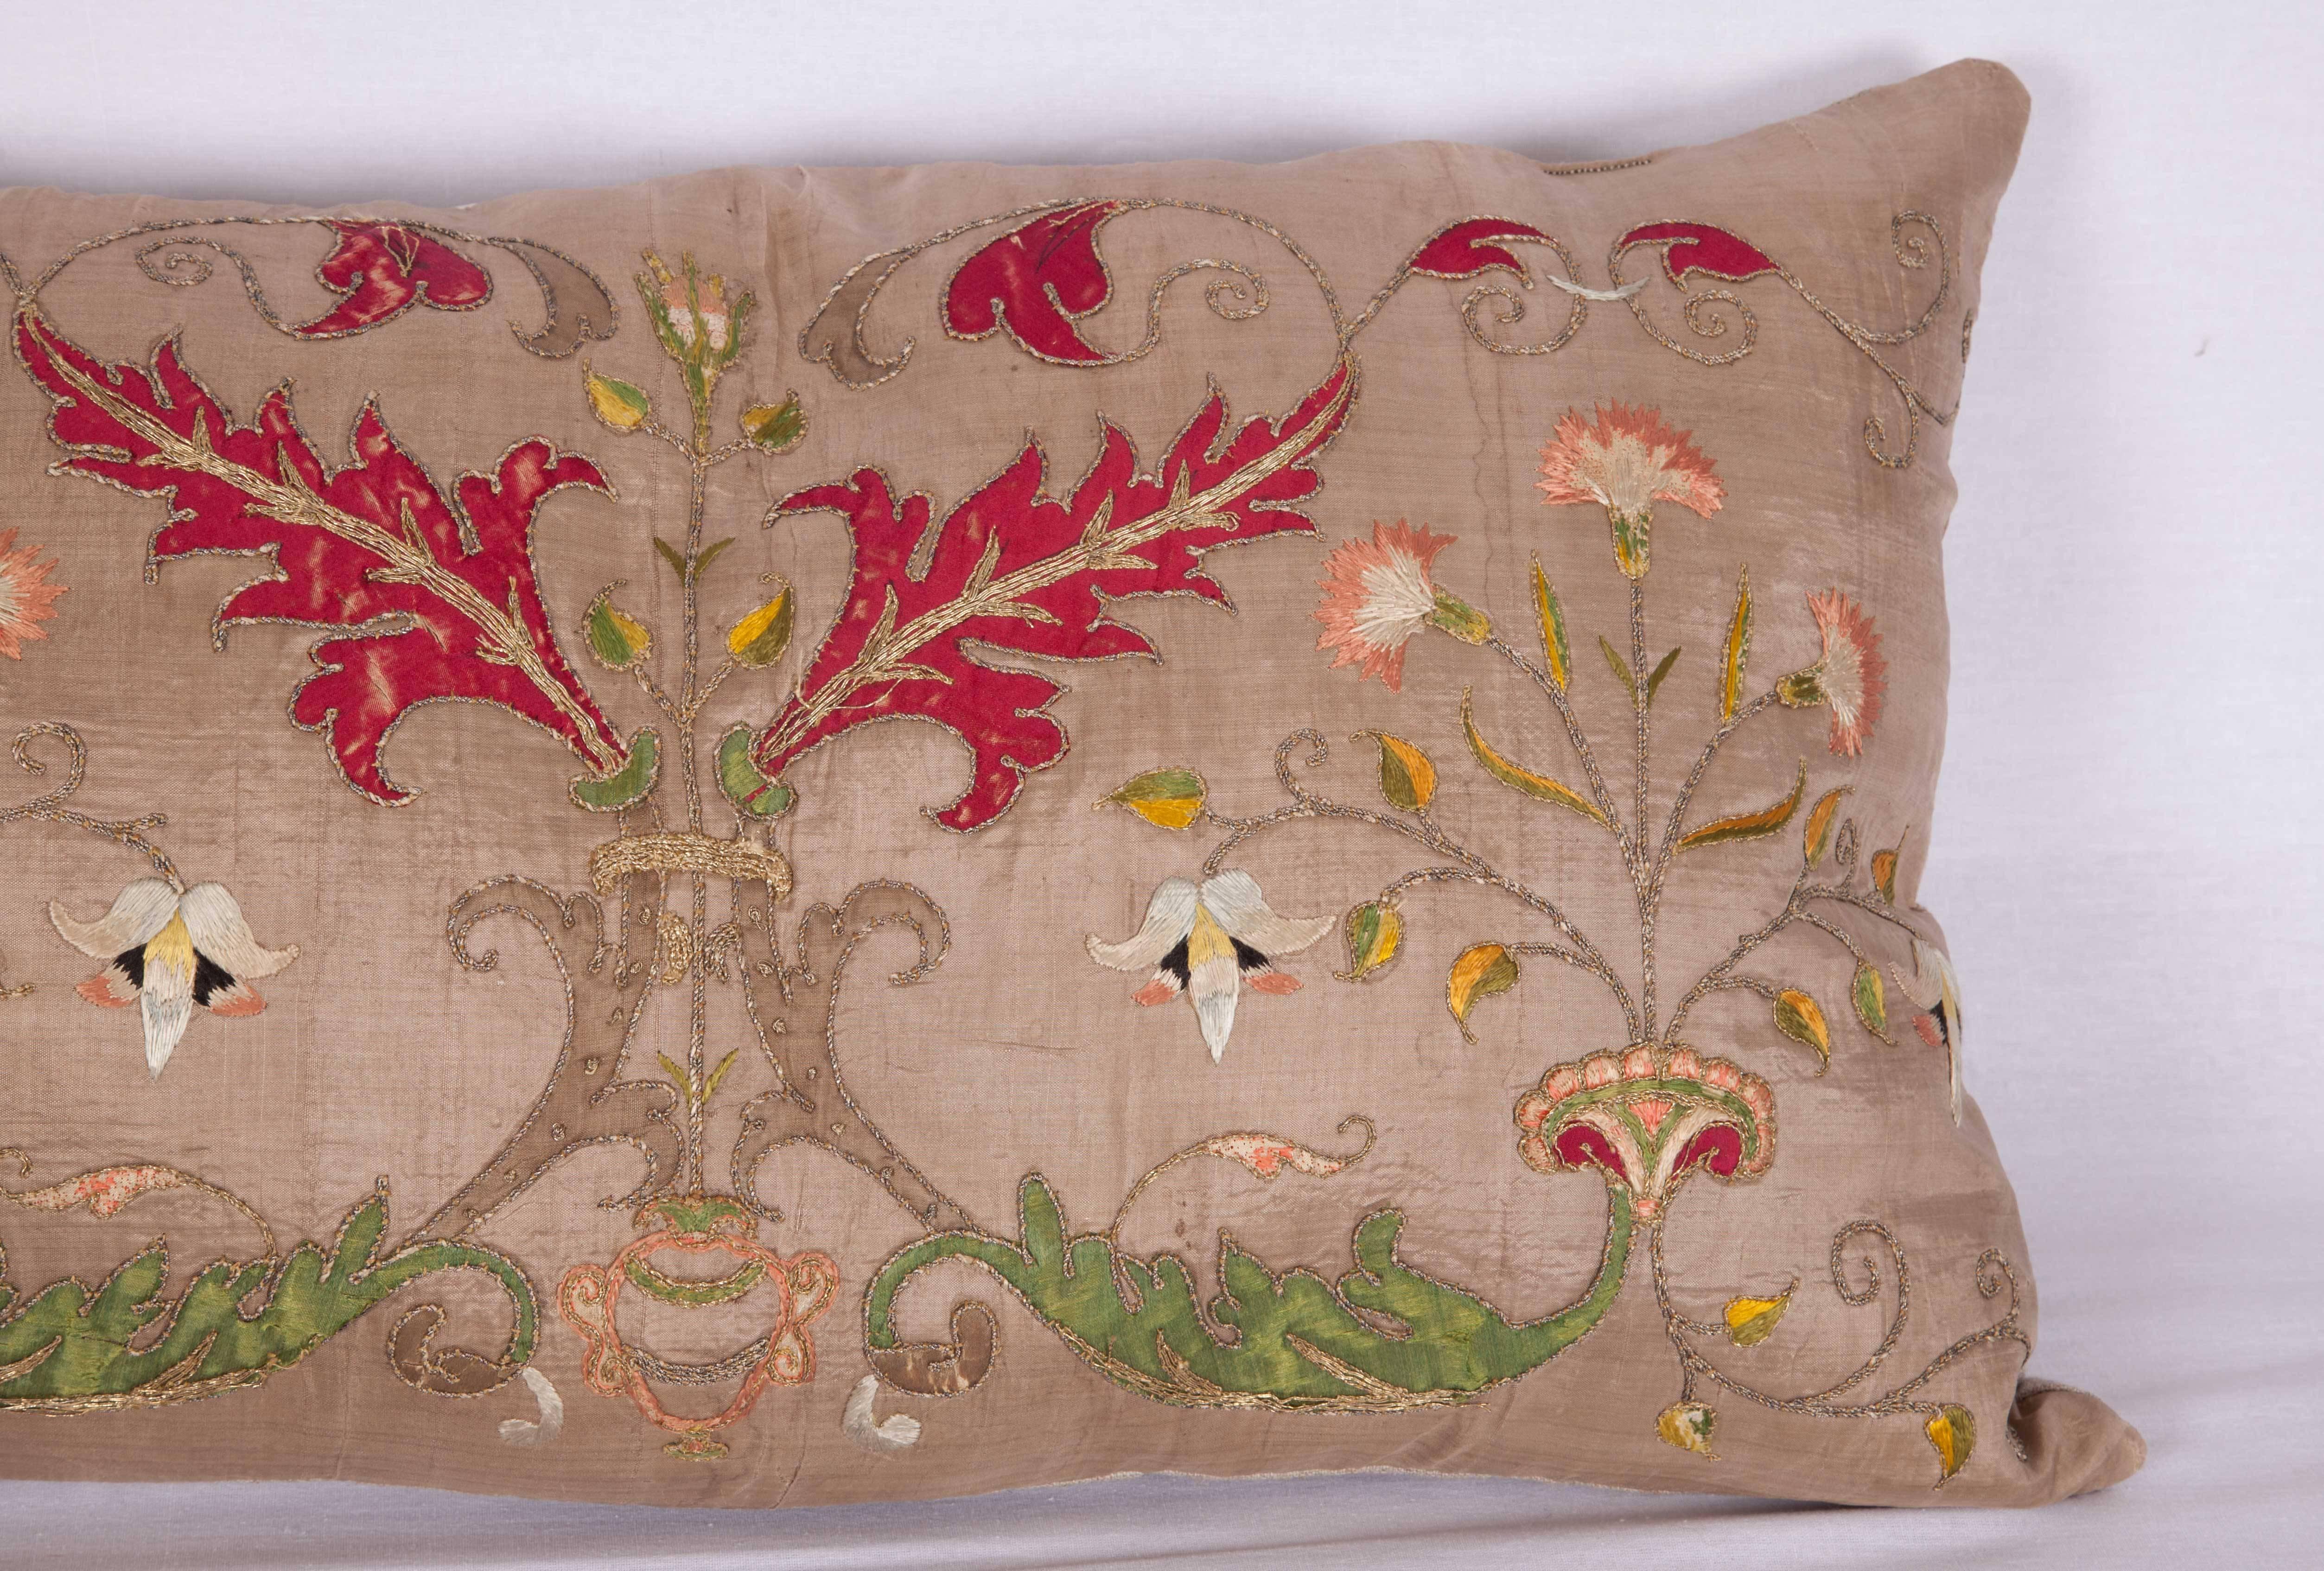 Embroidered Pillow Case Fashioned Out of 17th/18th Century Italian Silk Applique Embroidery